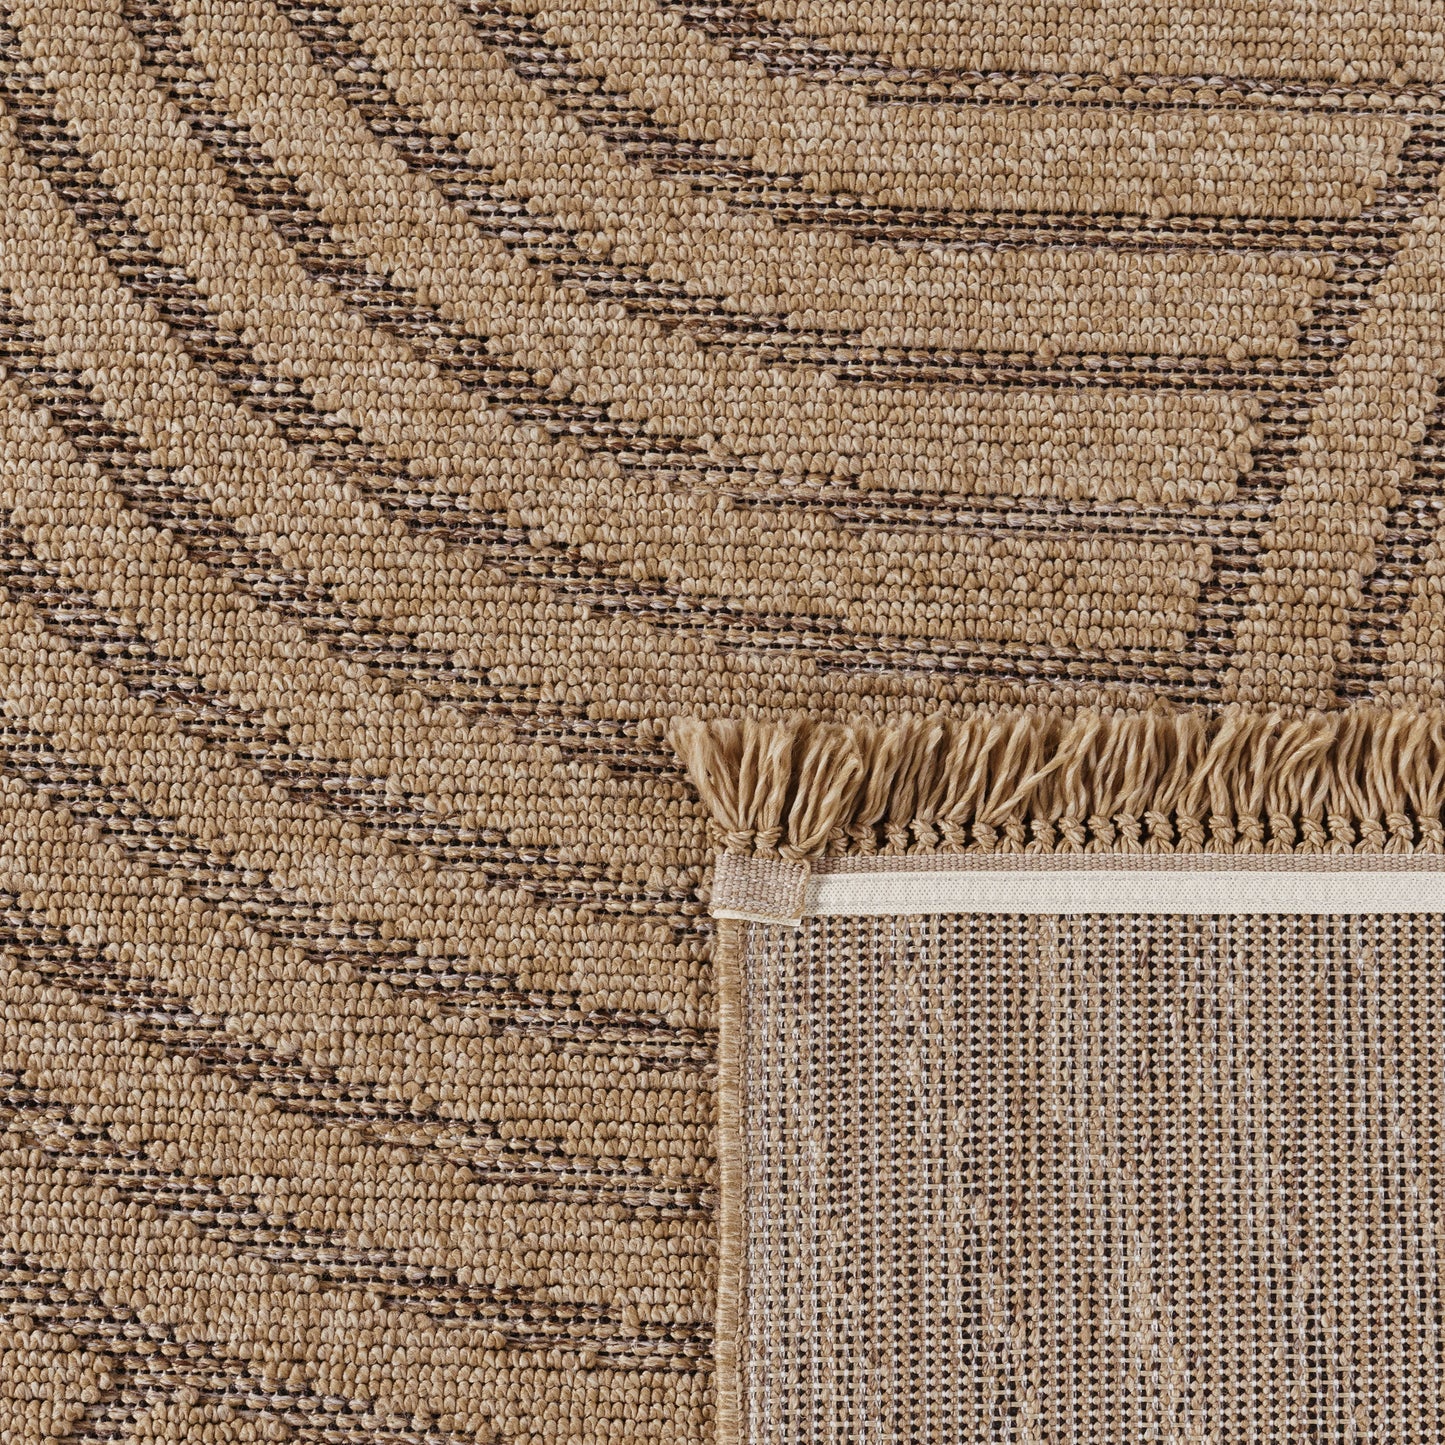 In- & Outdoor Rug Cologne with Modern Lines & Circles in Beige